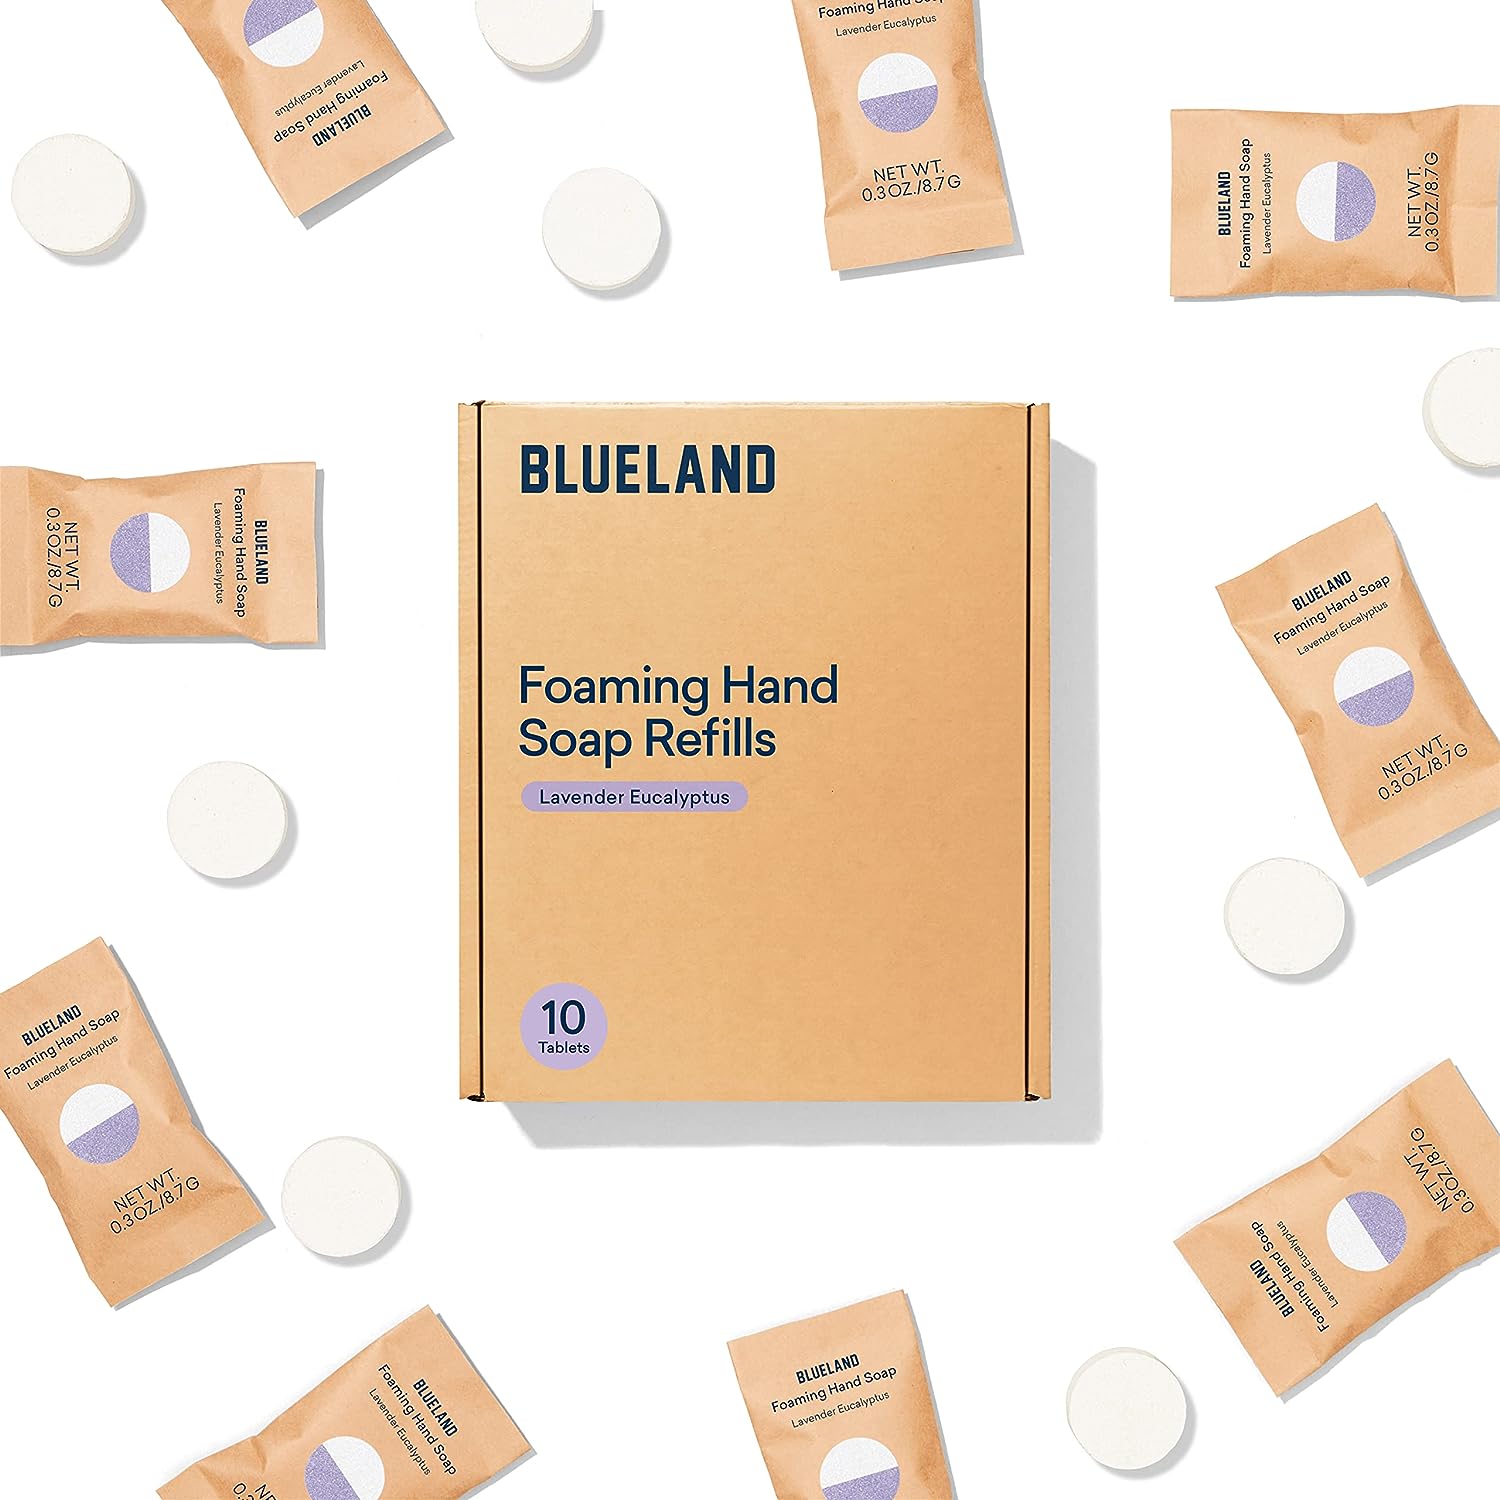 BLUELAND Foaming Hand Soap Refills - 10 Pack Tablets, Lavender Eucalyptus Scent, Eco Friendly Hand Soap and Cleaning Products - Makes 10 x 9   bottles (90   total)